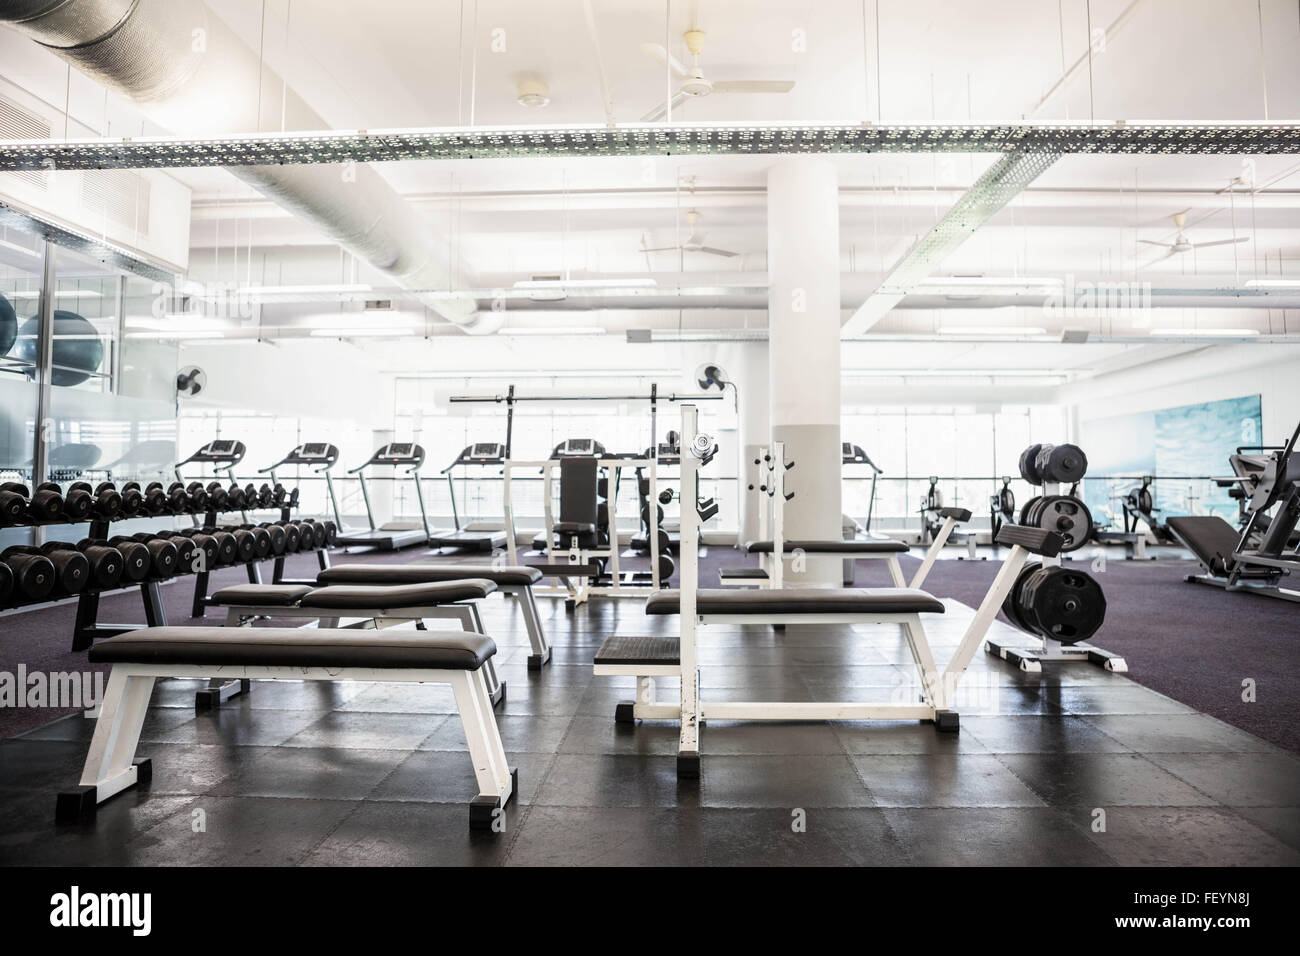 Gym with no people Stock Photo